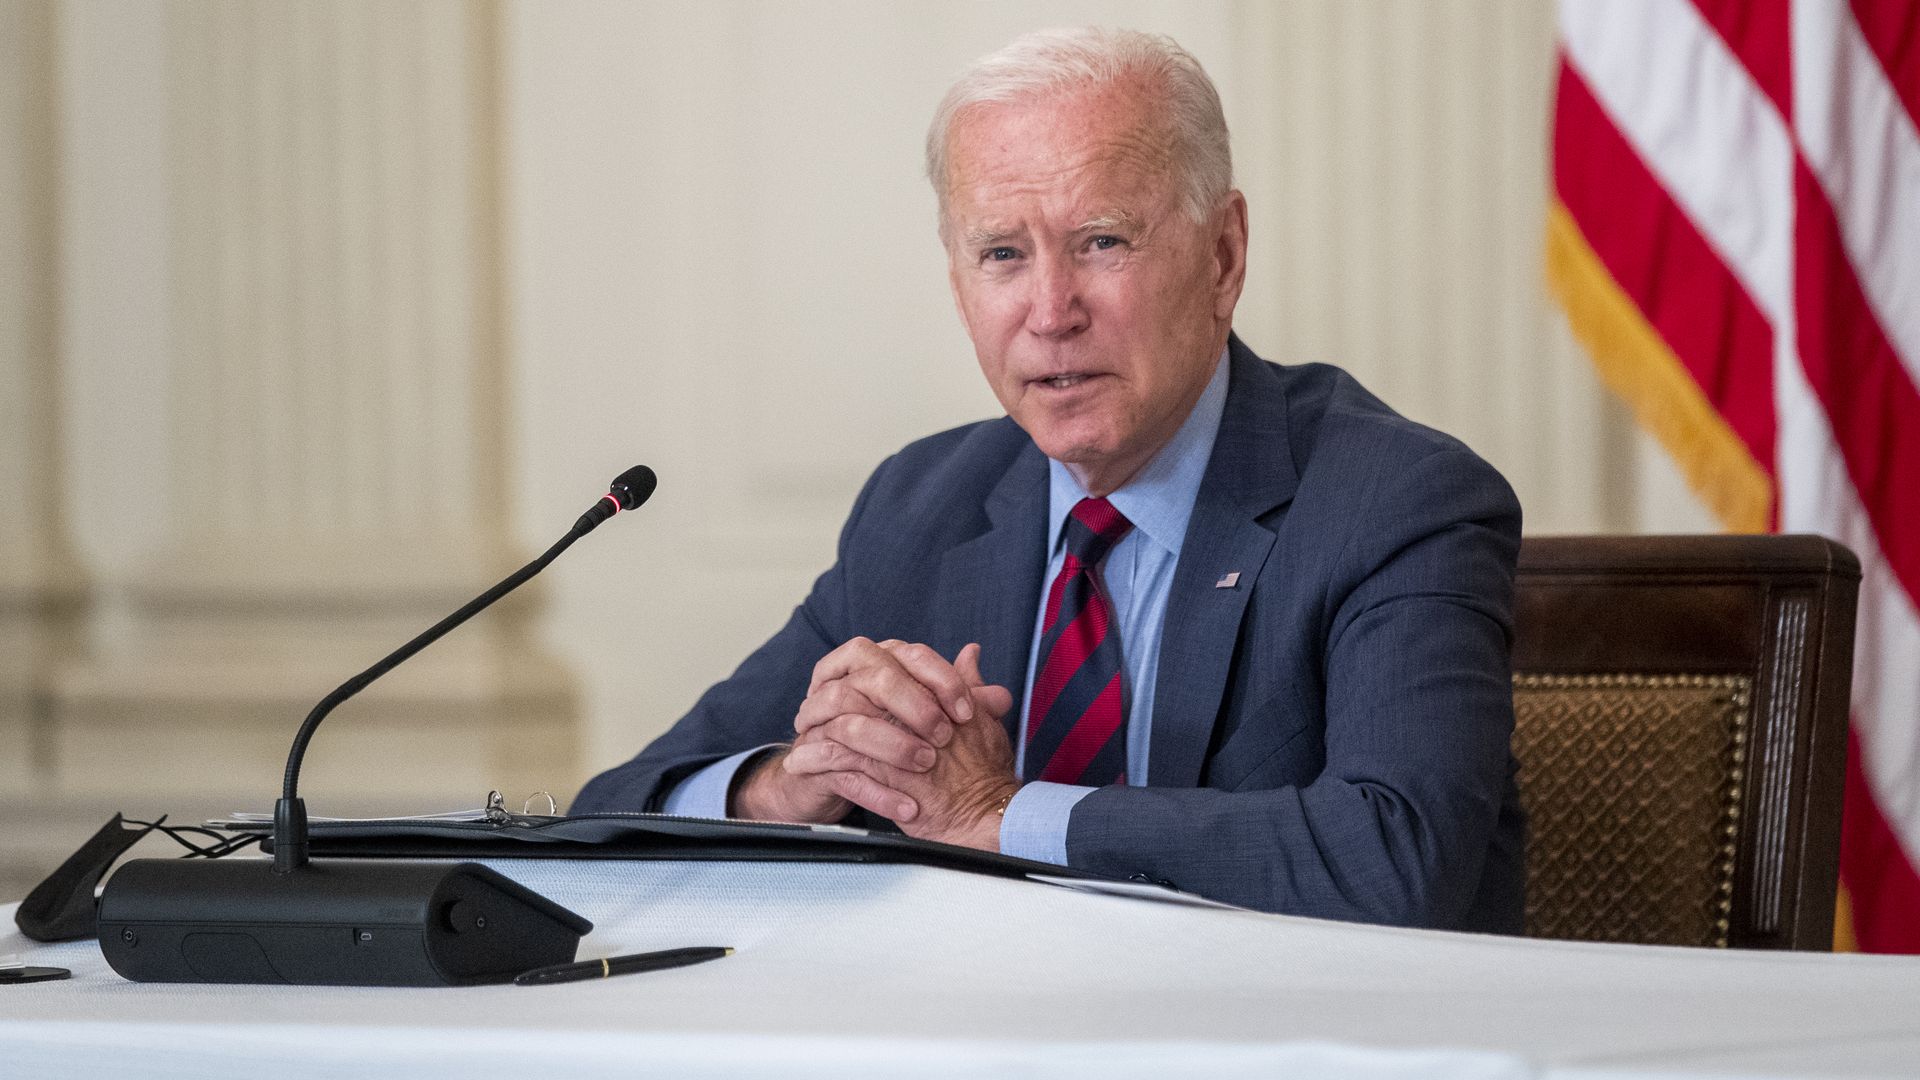 President Joe Biden sits at a meeting with a microphone in front of him while his hands are clasped together